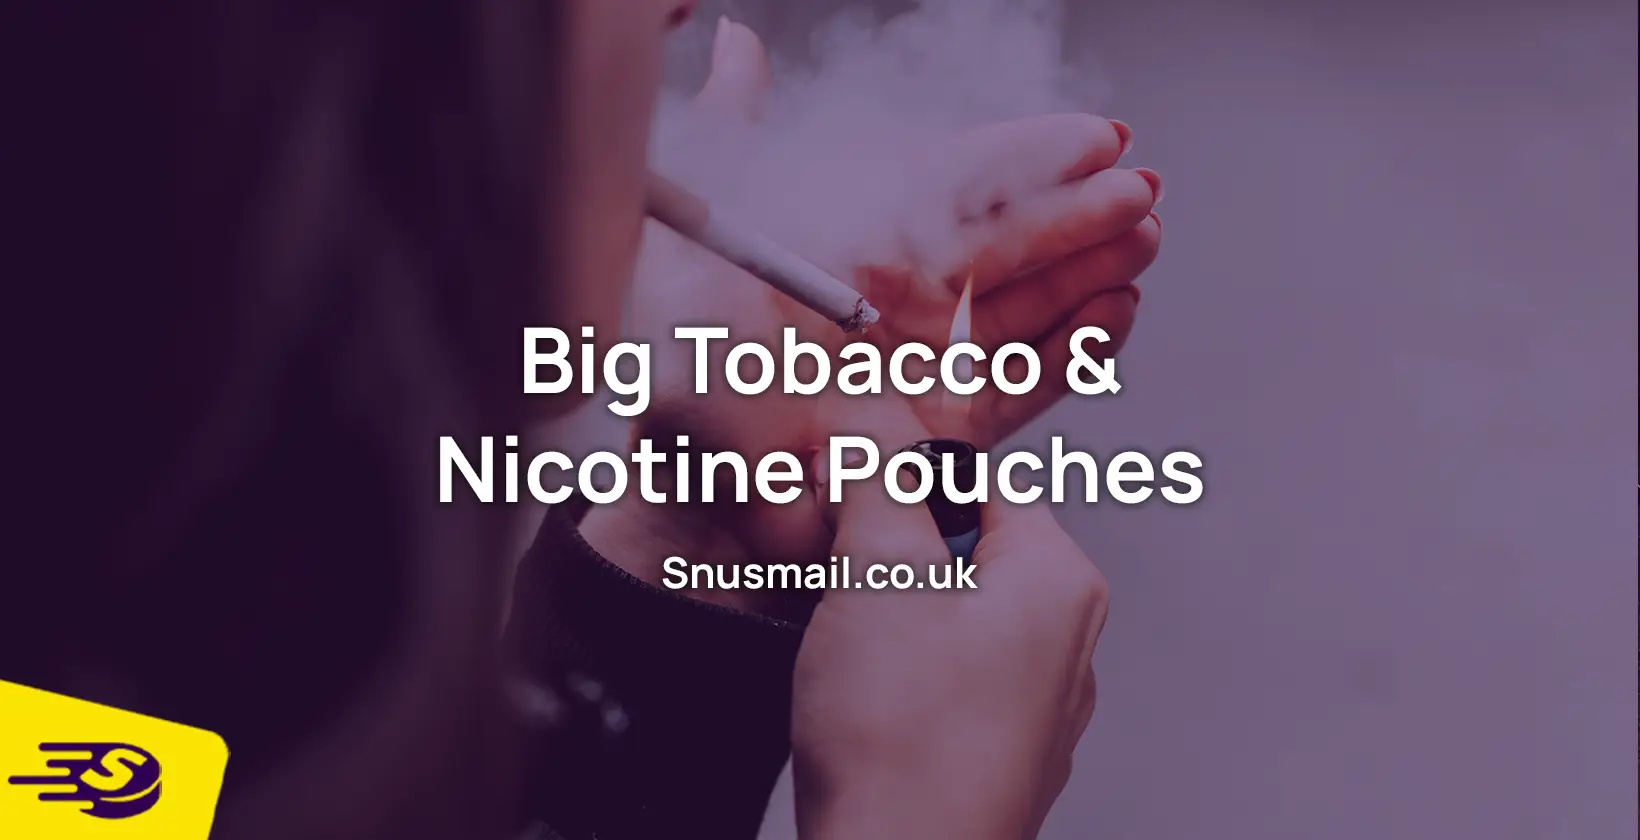 Big tobacco and nicotine pouches